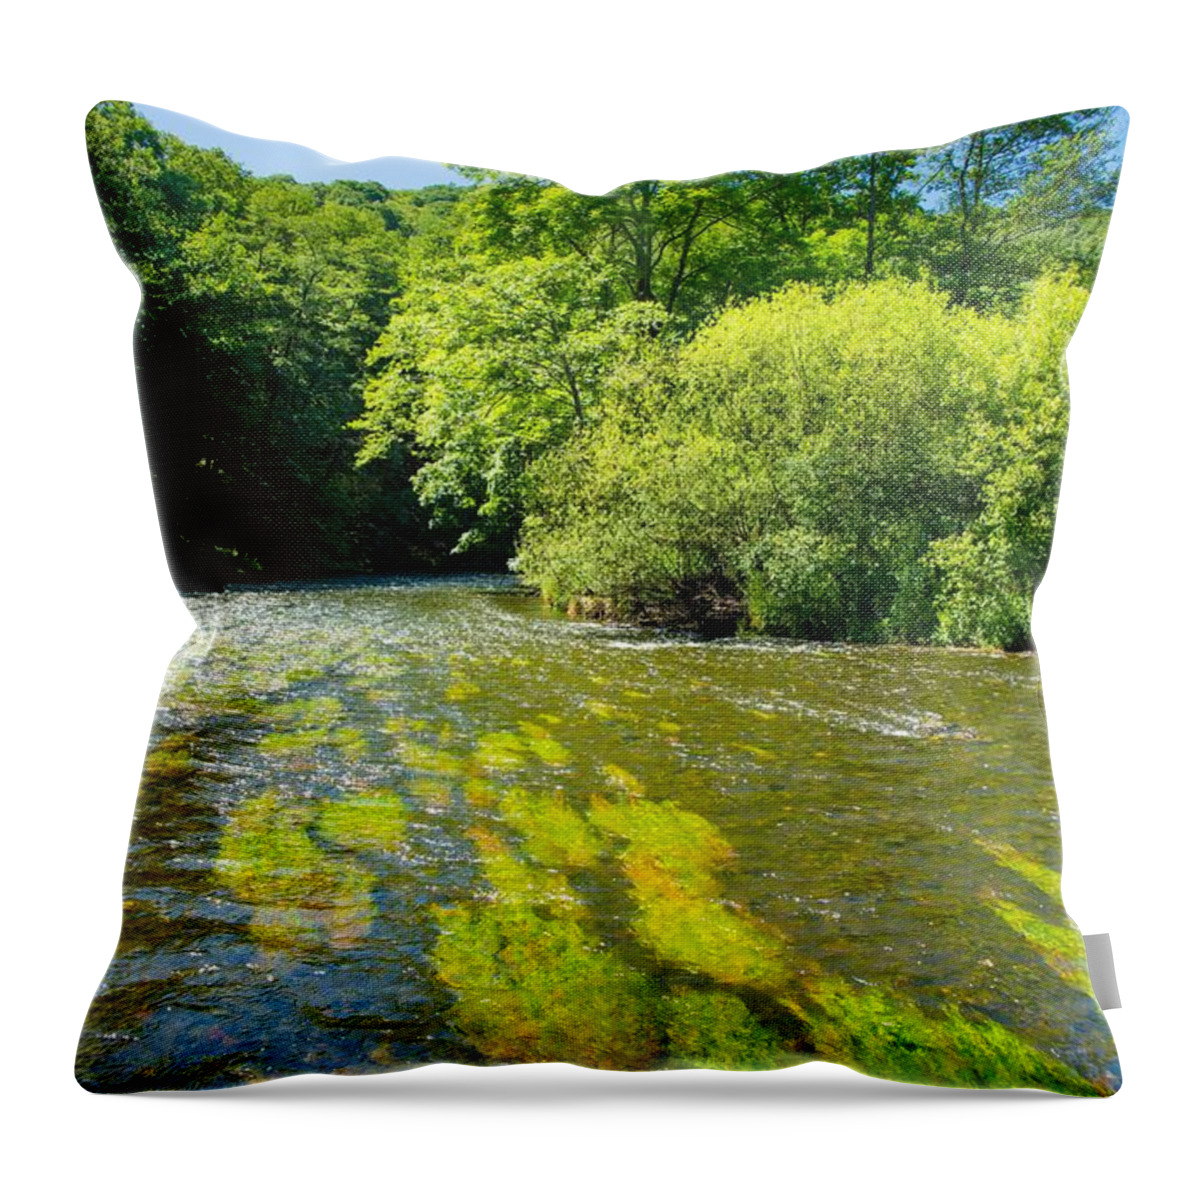 River Throw Pillow featuring the photograph River Thaya In Austria by Andreas Berthold